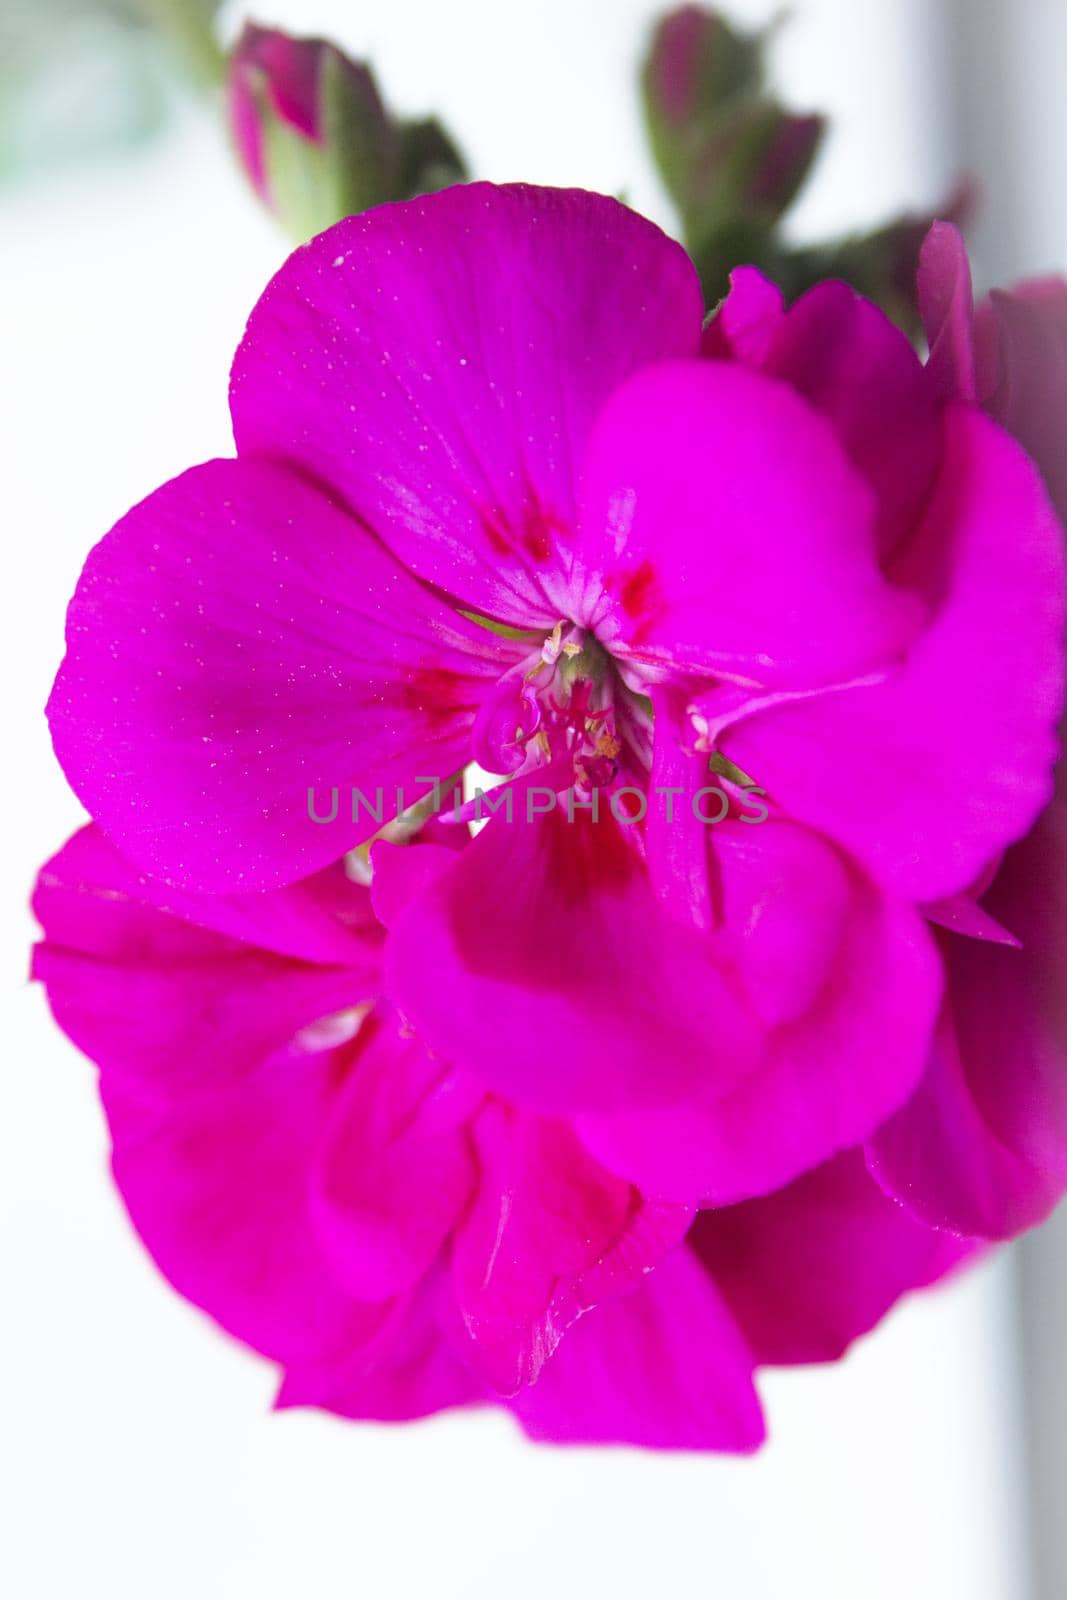 Geranium flower in pink with green leaves. No people